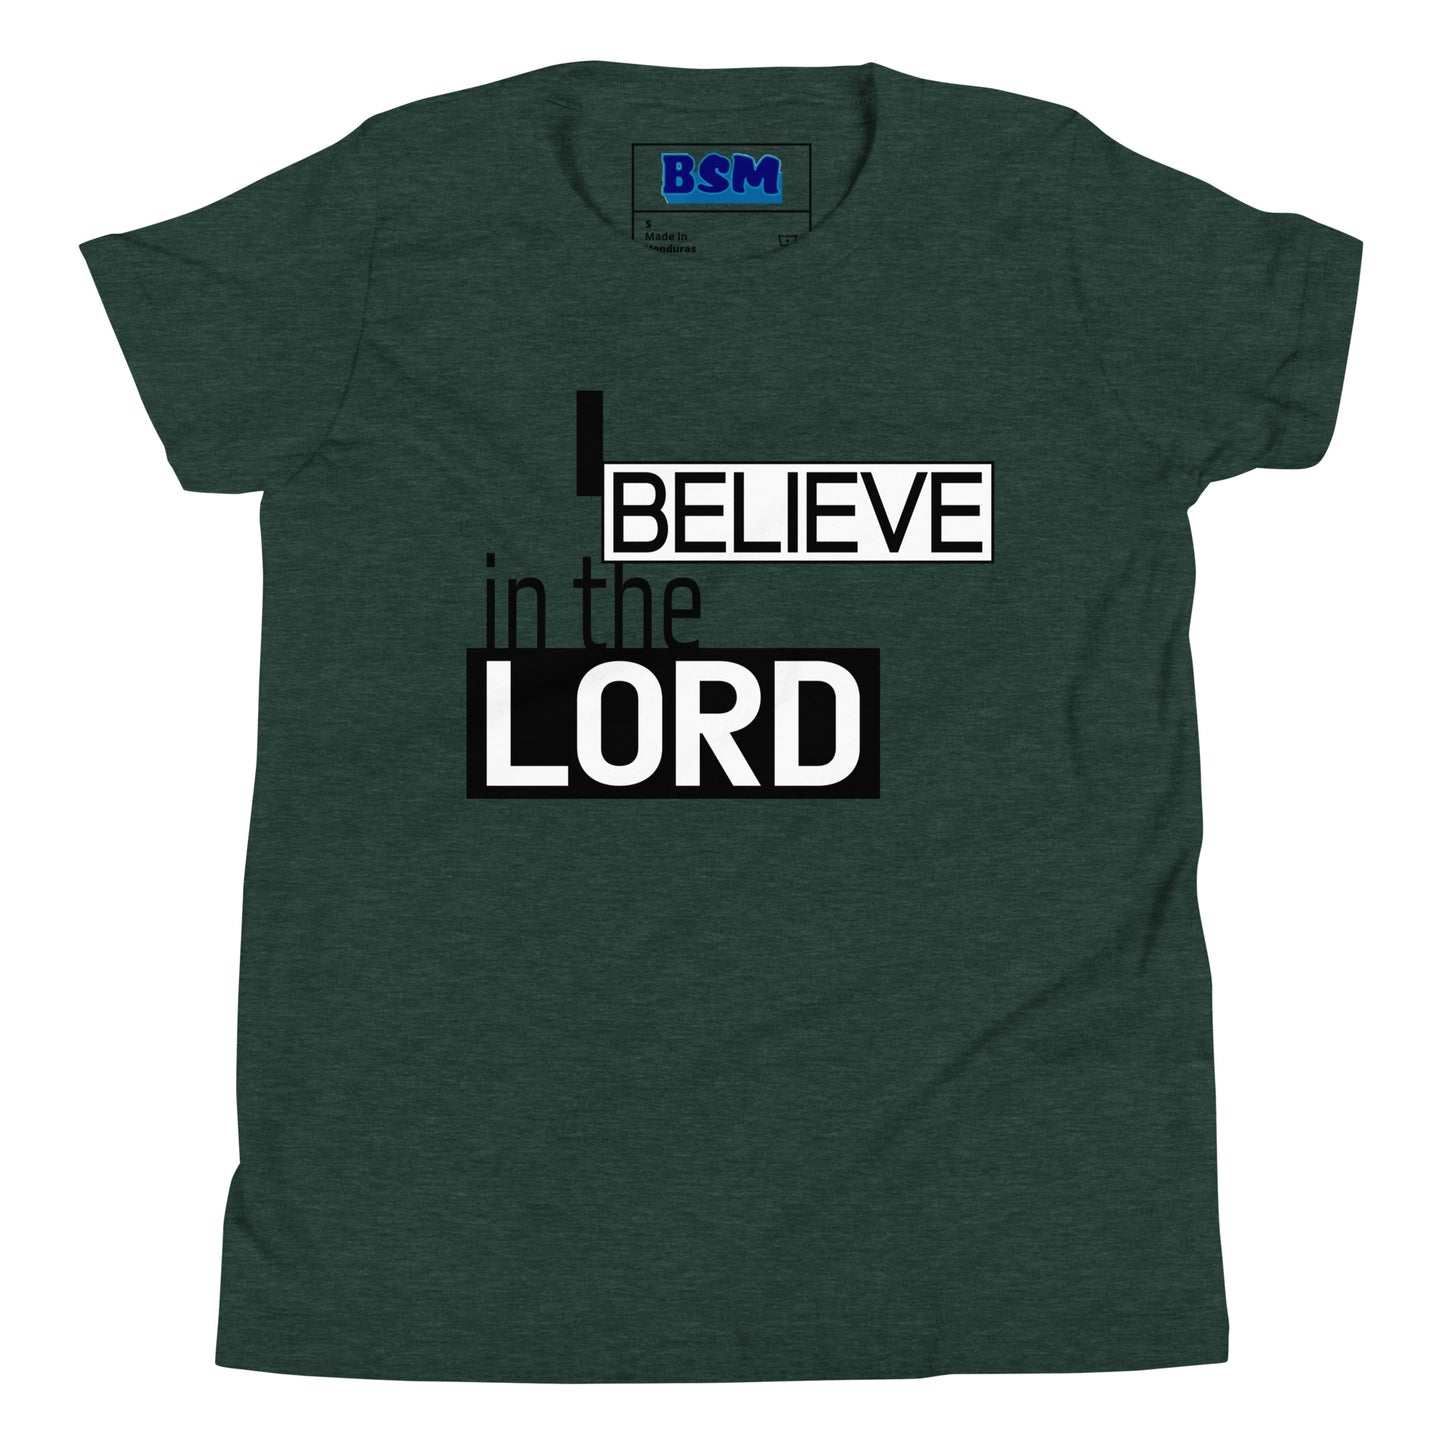 I Believe in the Lord Youth T-Shirt